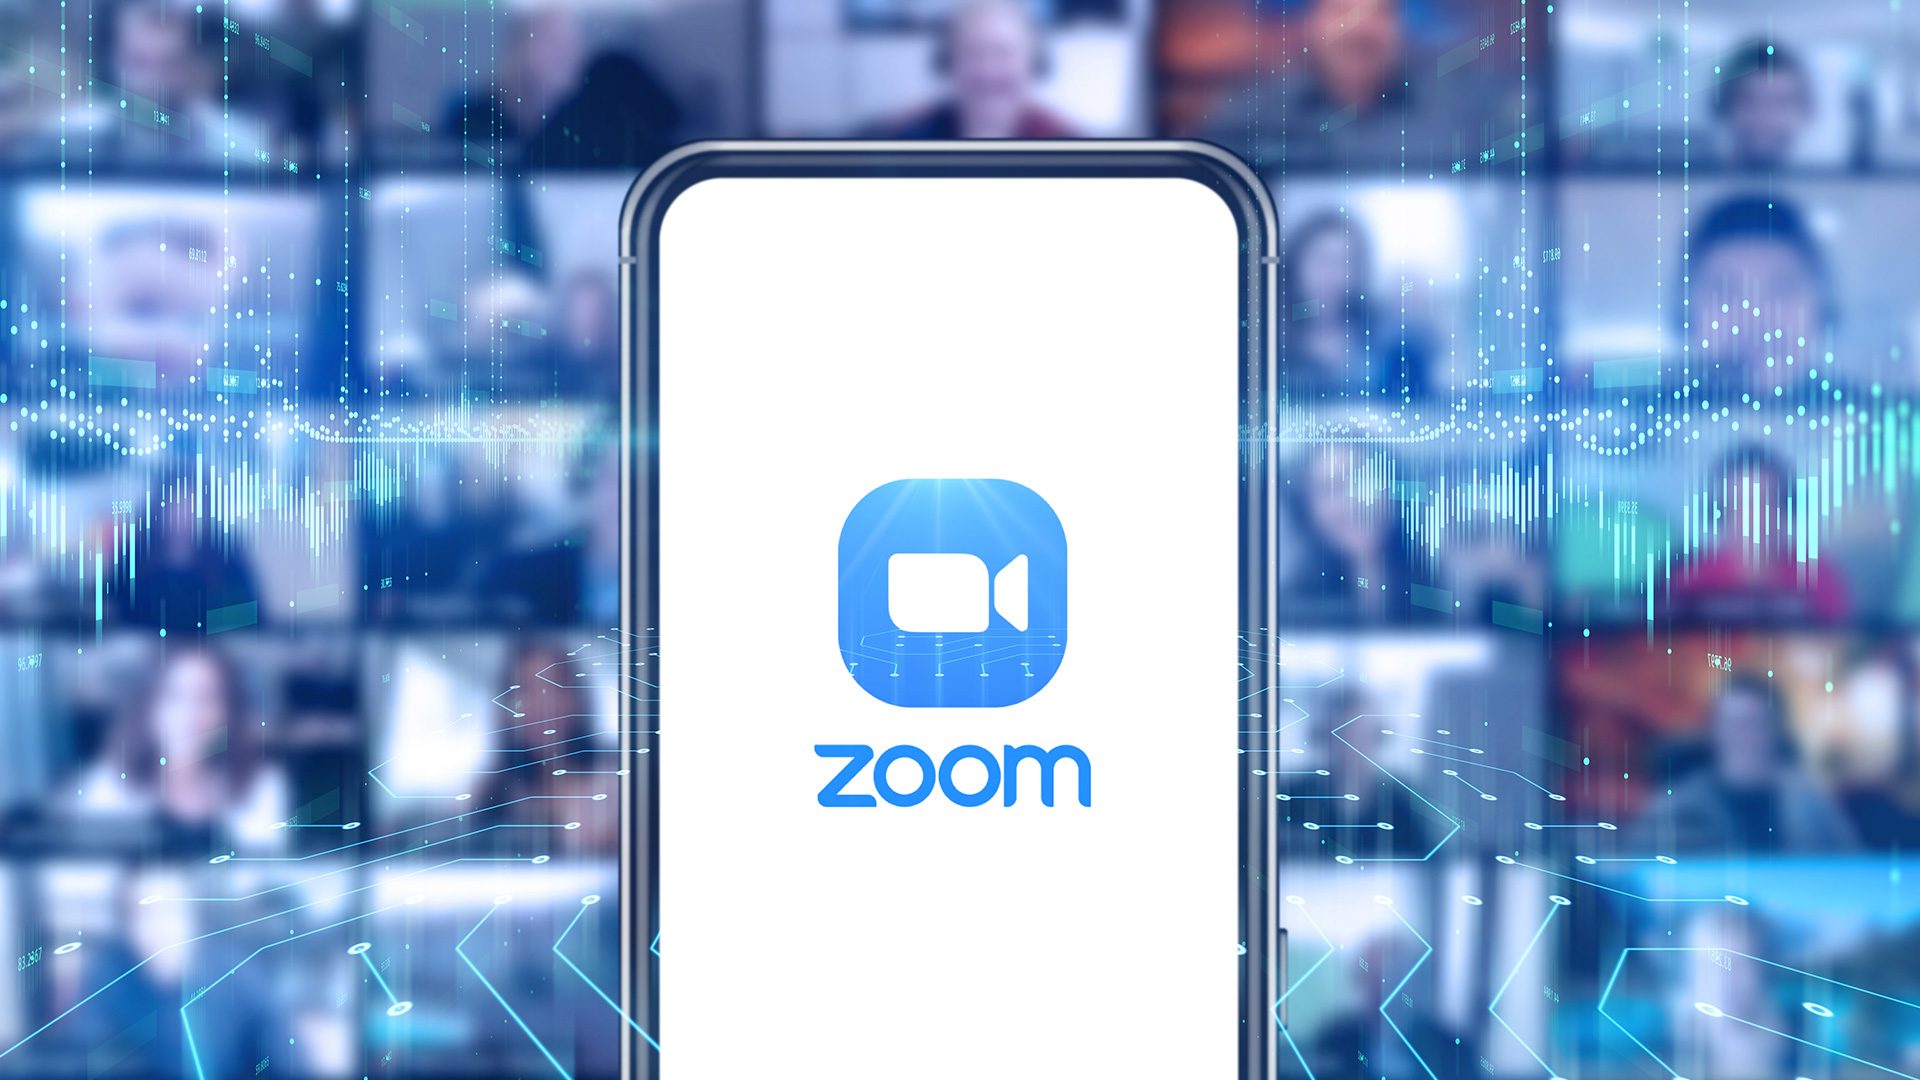 What you should know about Zoom’s policies on AI training using your data